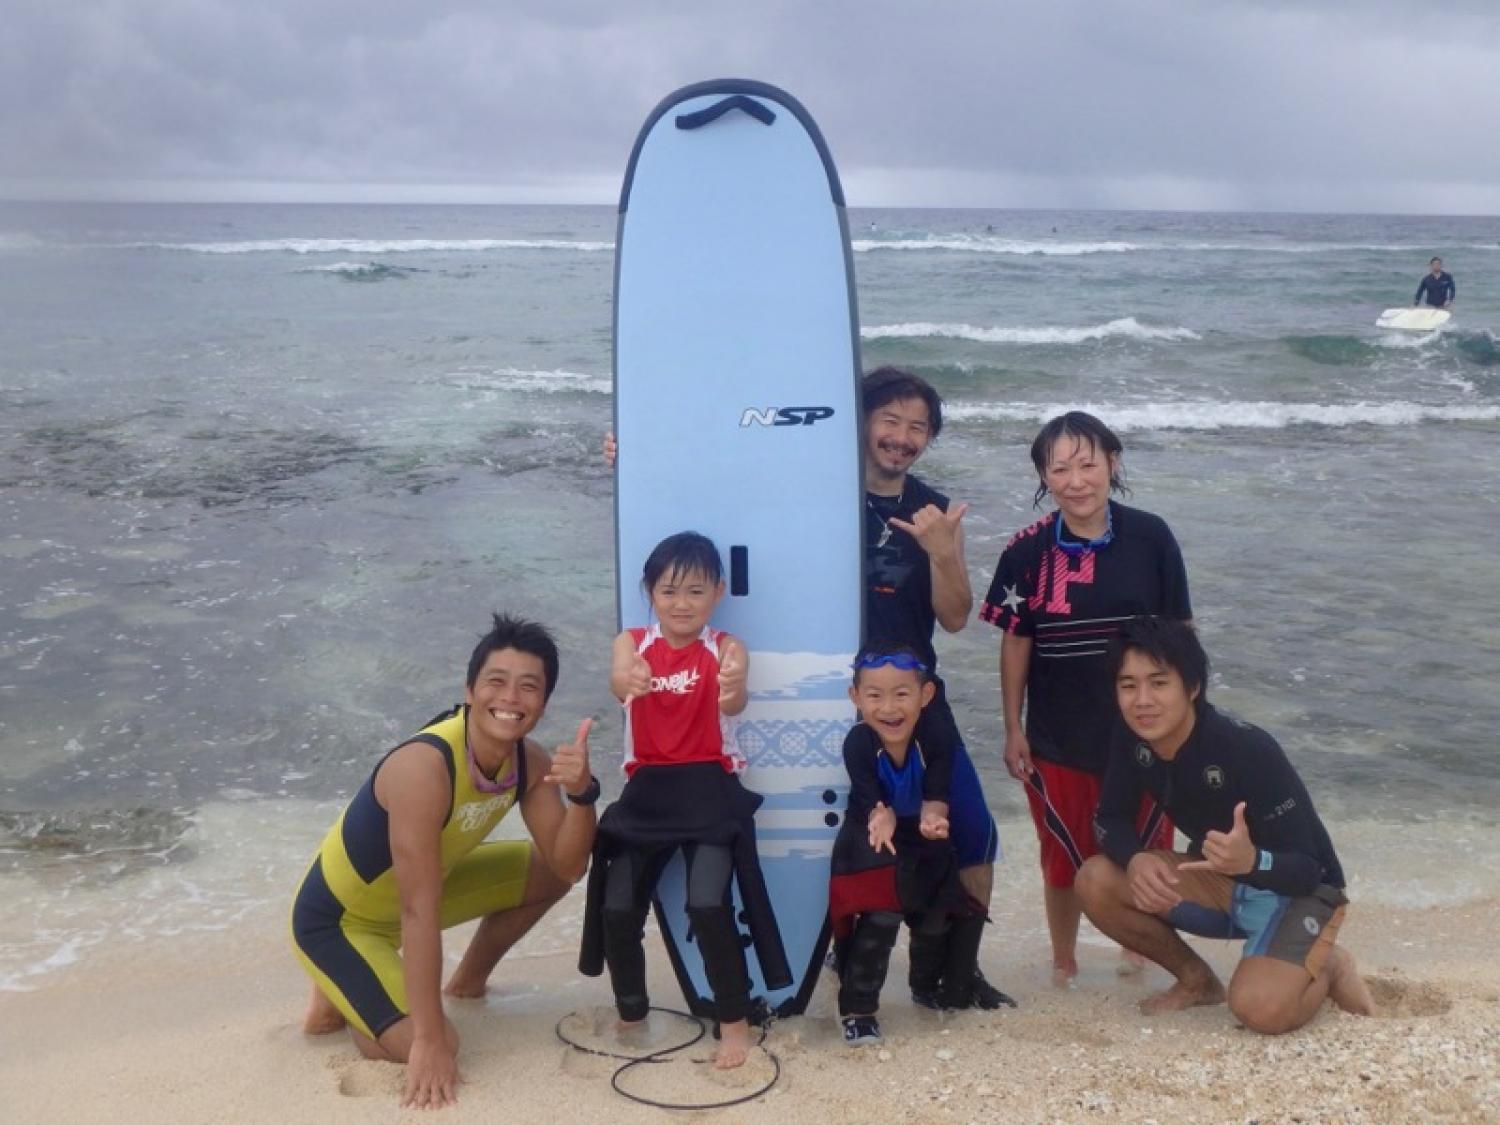 The Surfing Lesson for Kids 12th June 